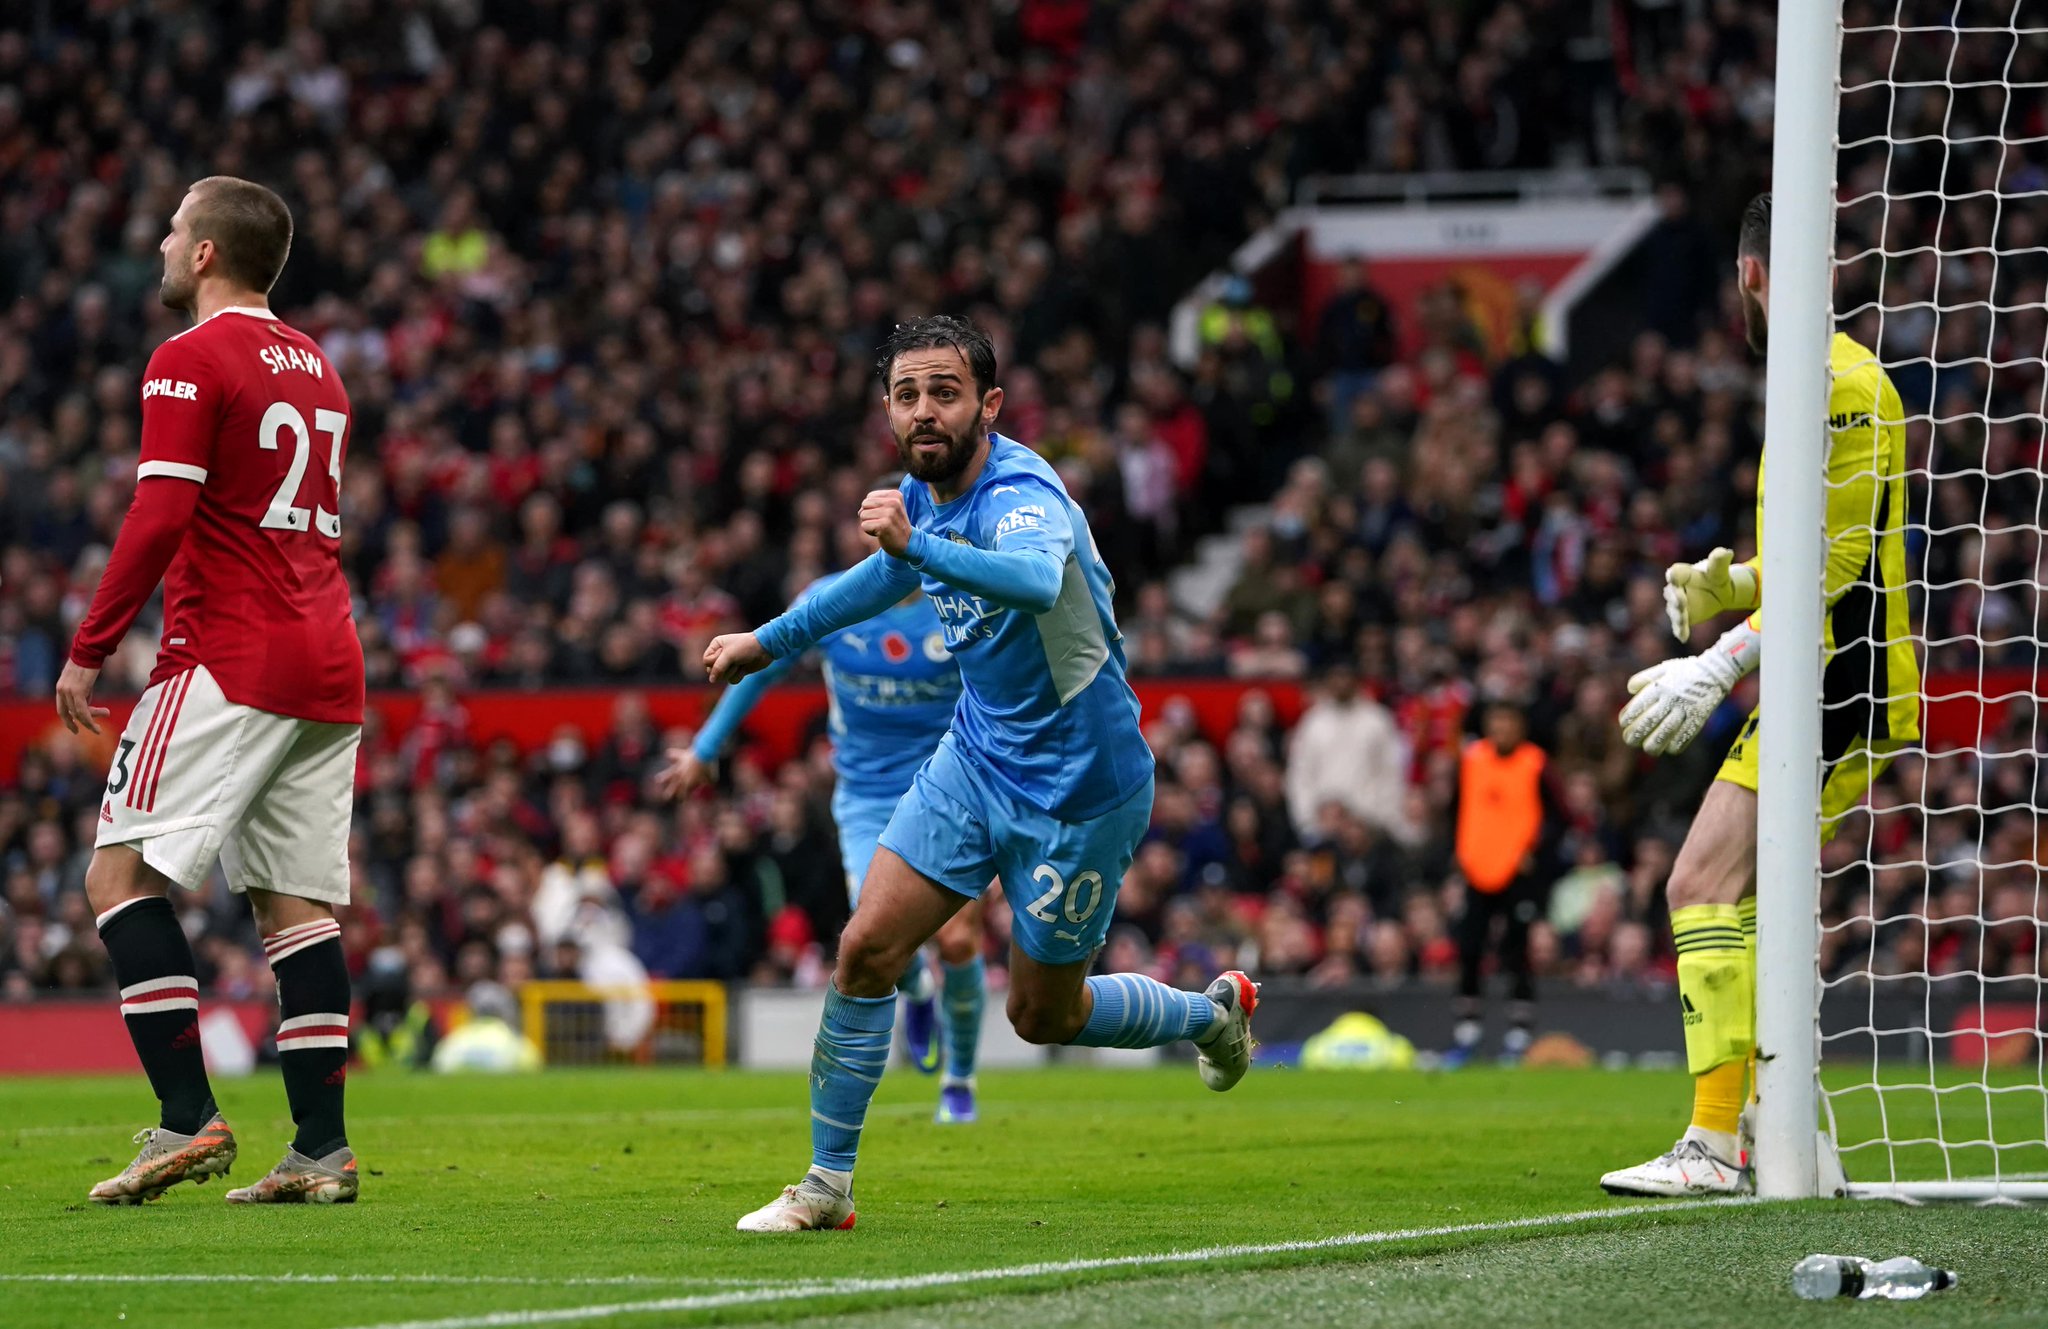 Manchester United 0 - 2 Manchester City